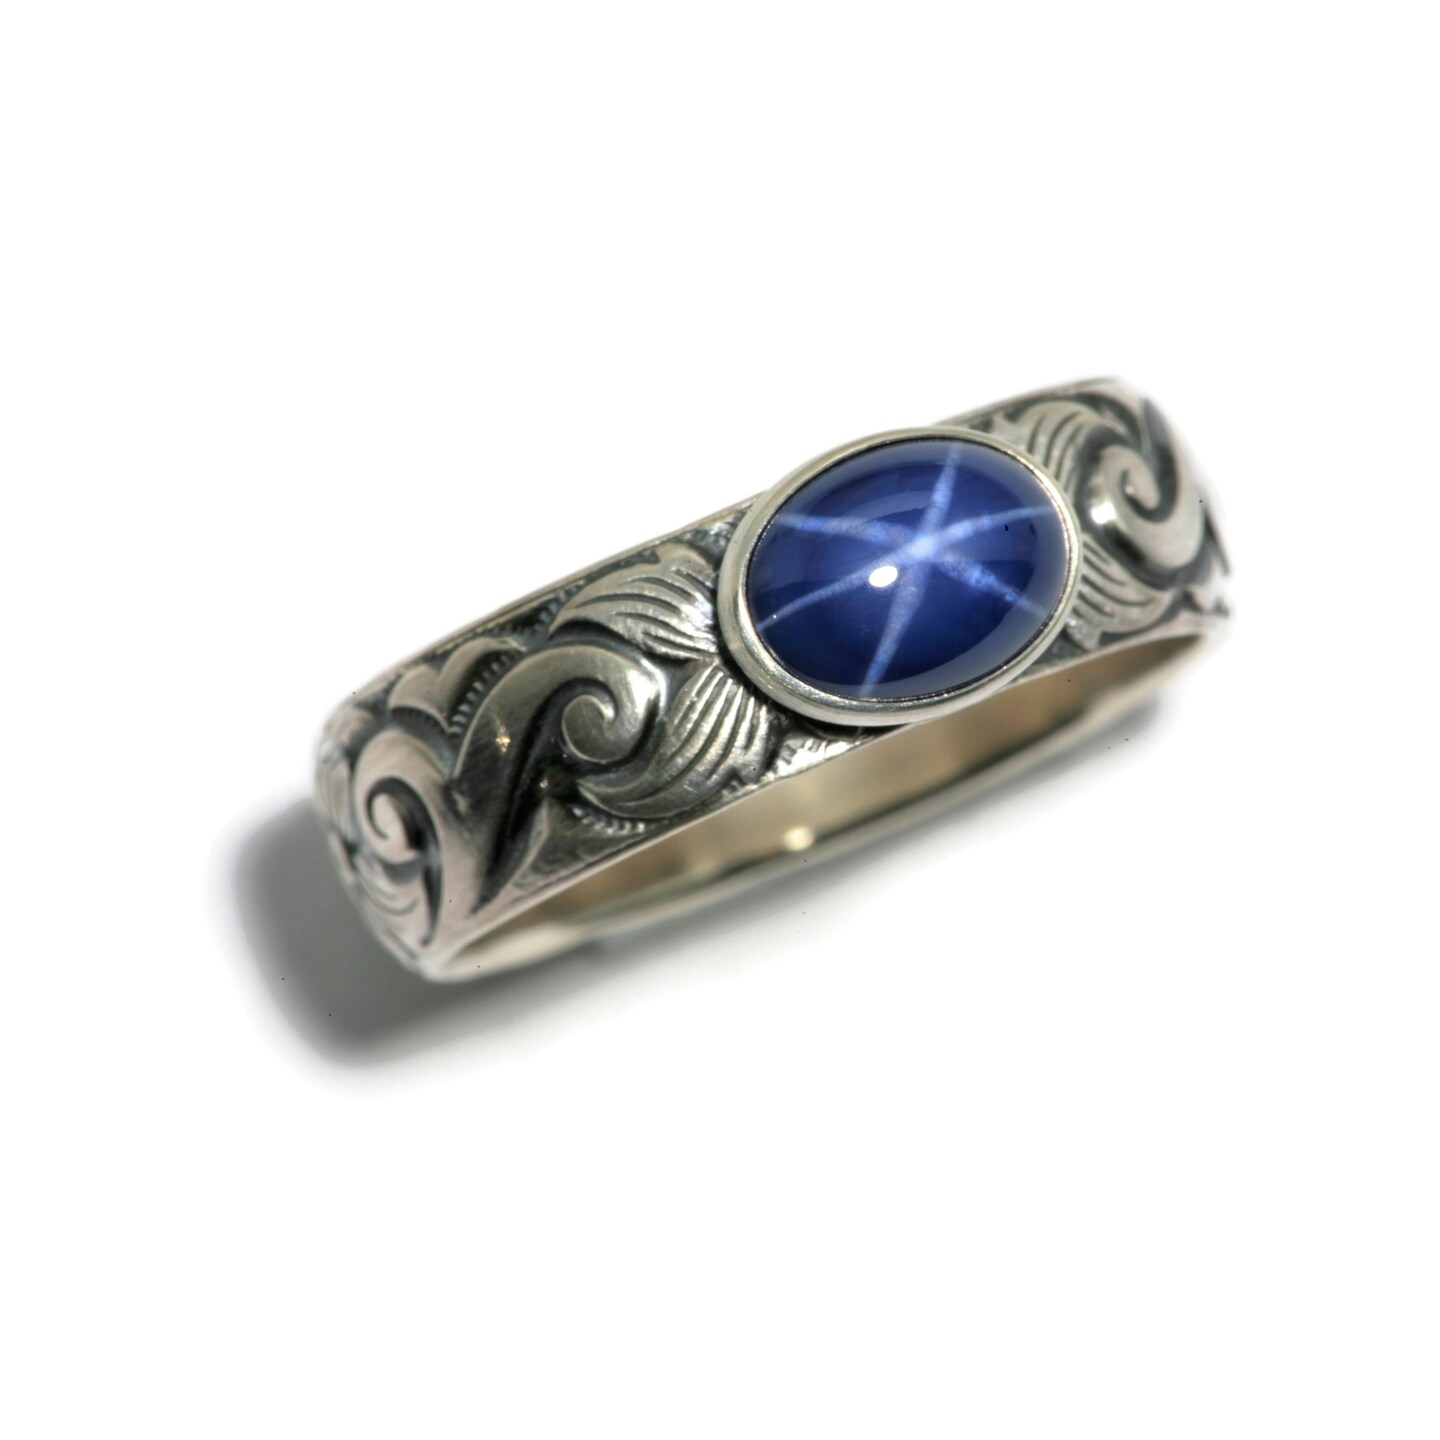 Genuine Blue Star Sapphire Sterling Silver Band Ring 22K Yellow Gold Filled  22K — Discovered